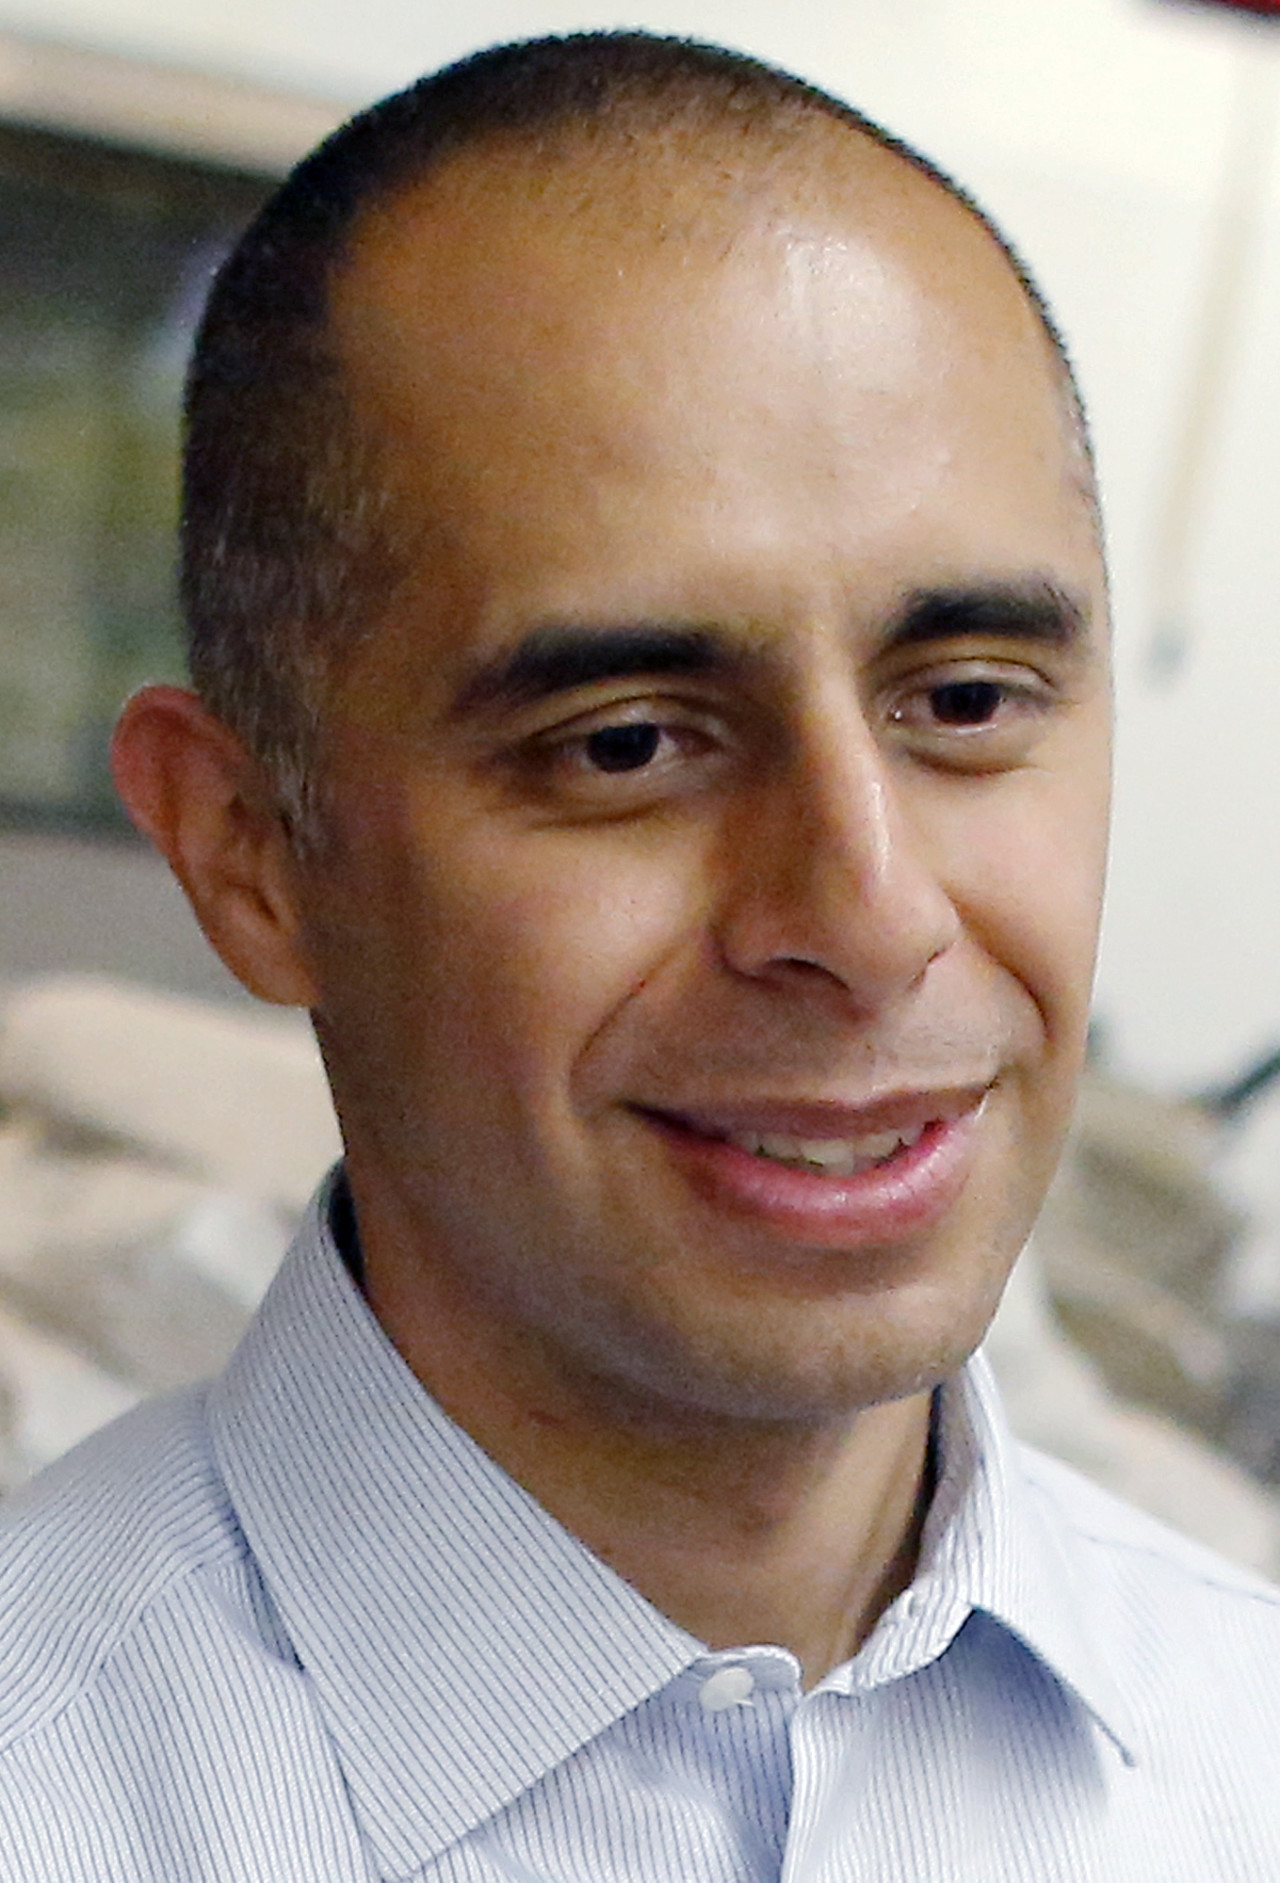 Jorge Elorza, Democratic candidate for mayor of Providence, R.I., campaigns in Providence. (Steven Senne/AP)